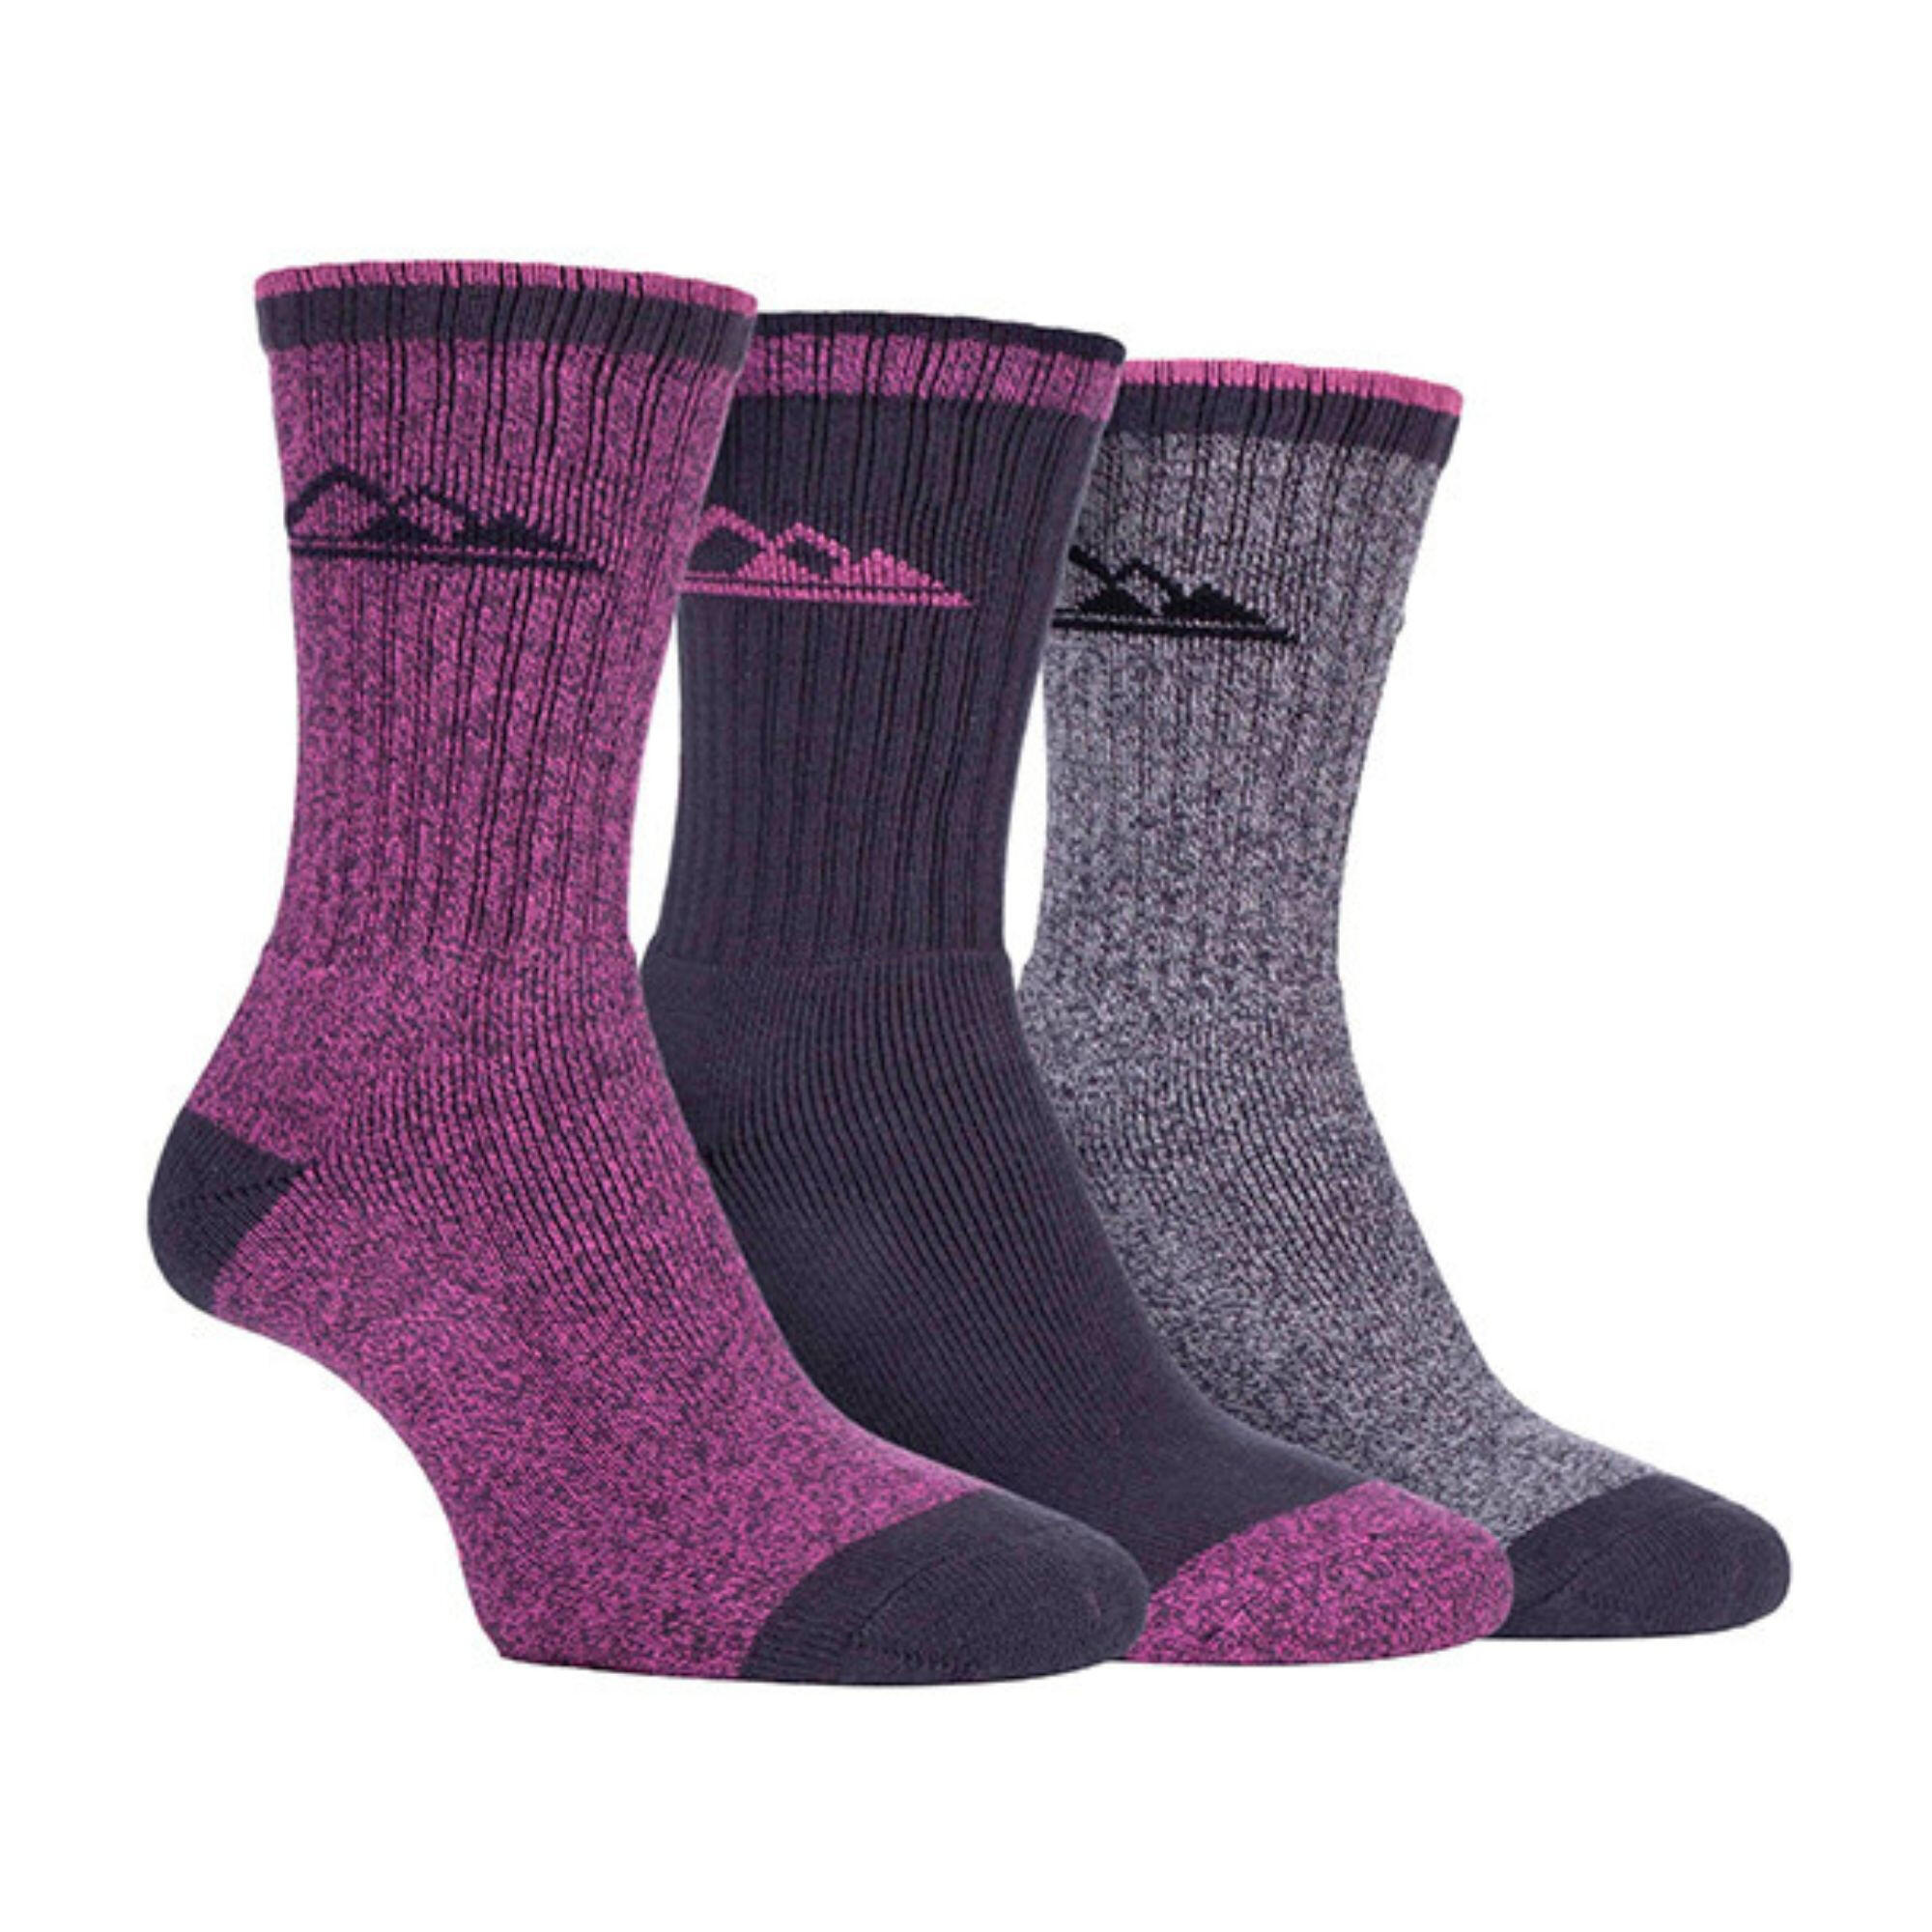 3 Pairs Ladies Lightweight Breathable Hiking Socks with Arch Support 1/7